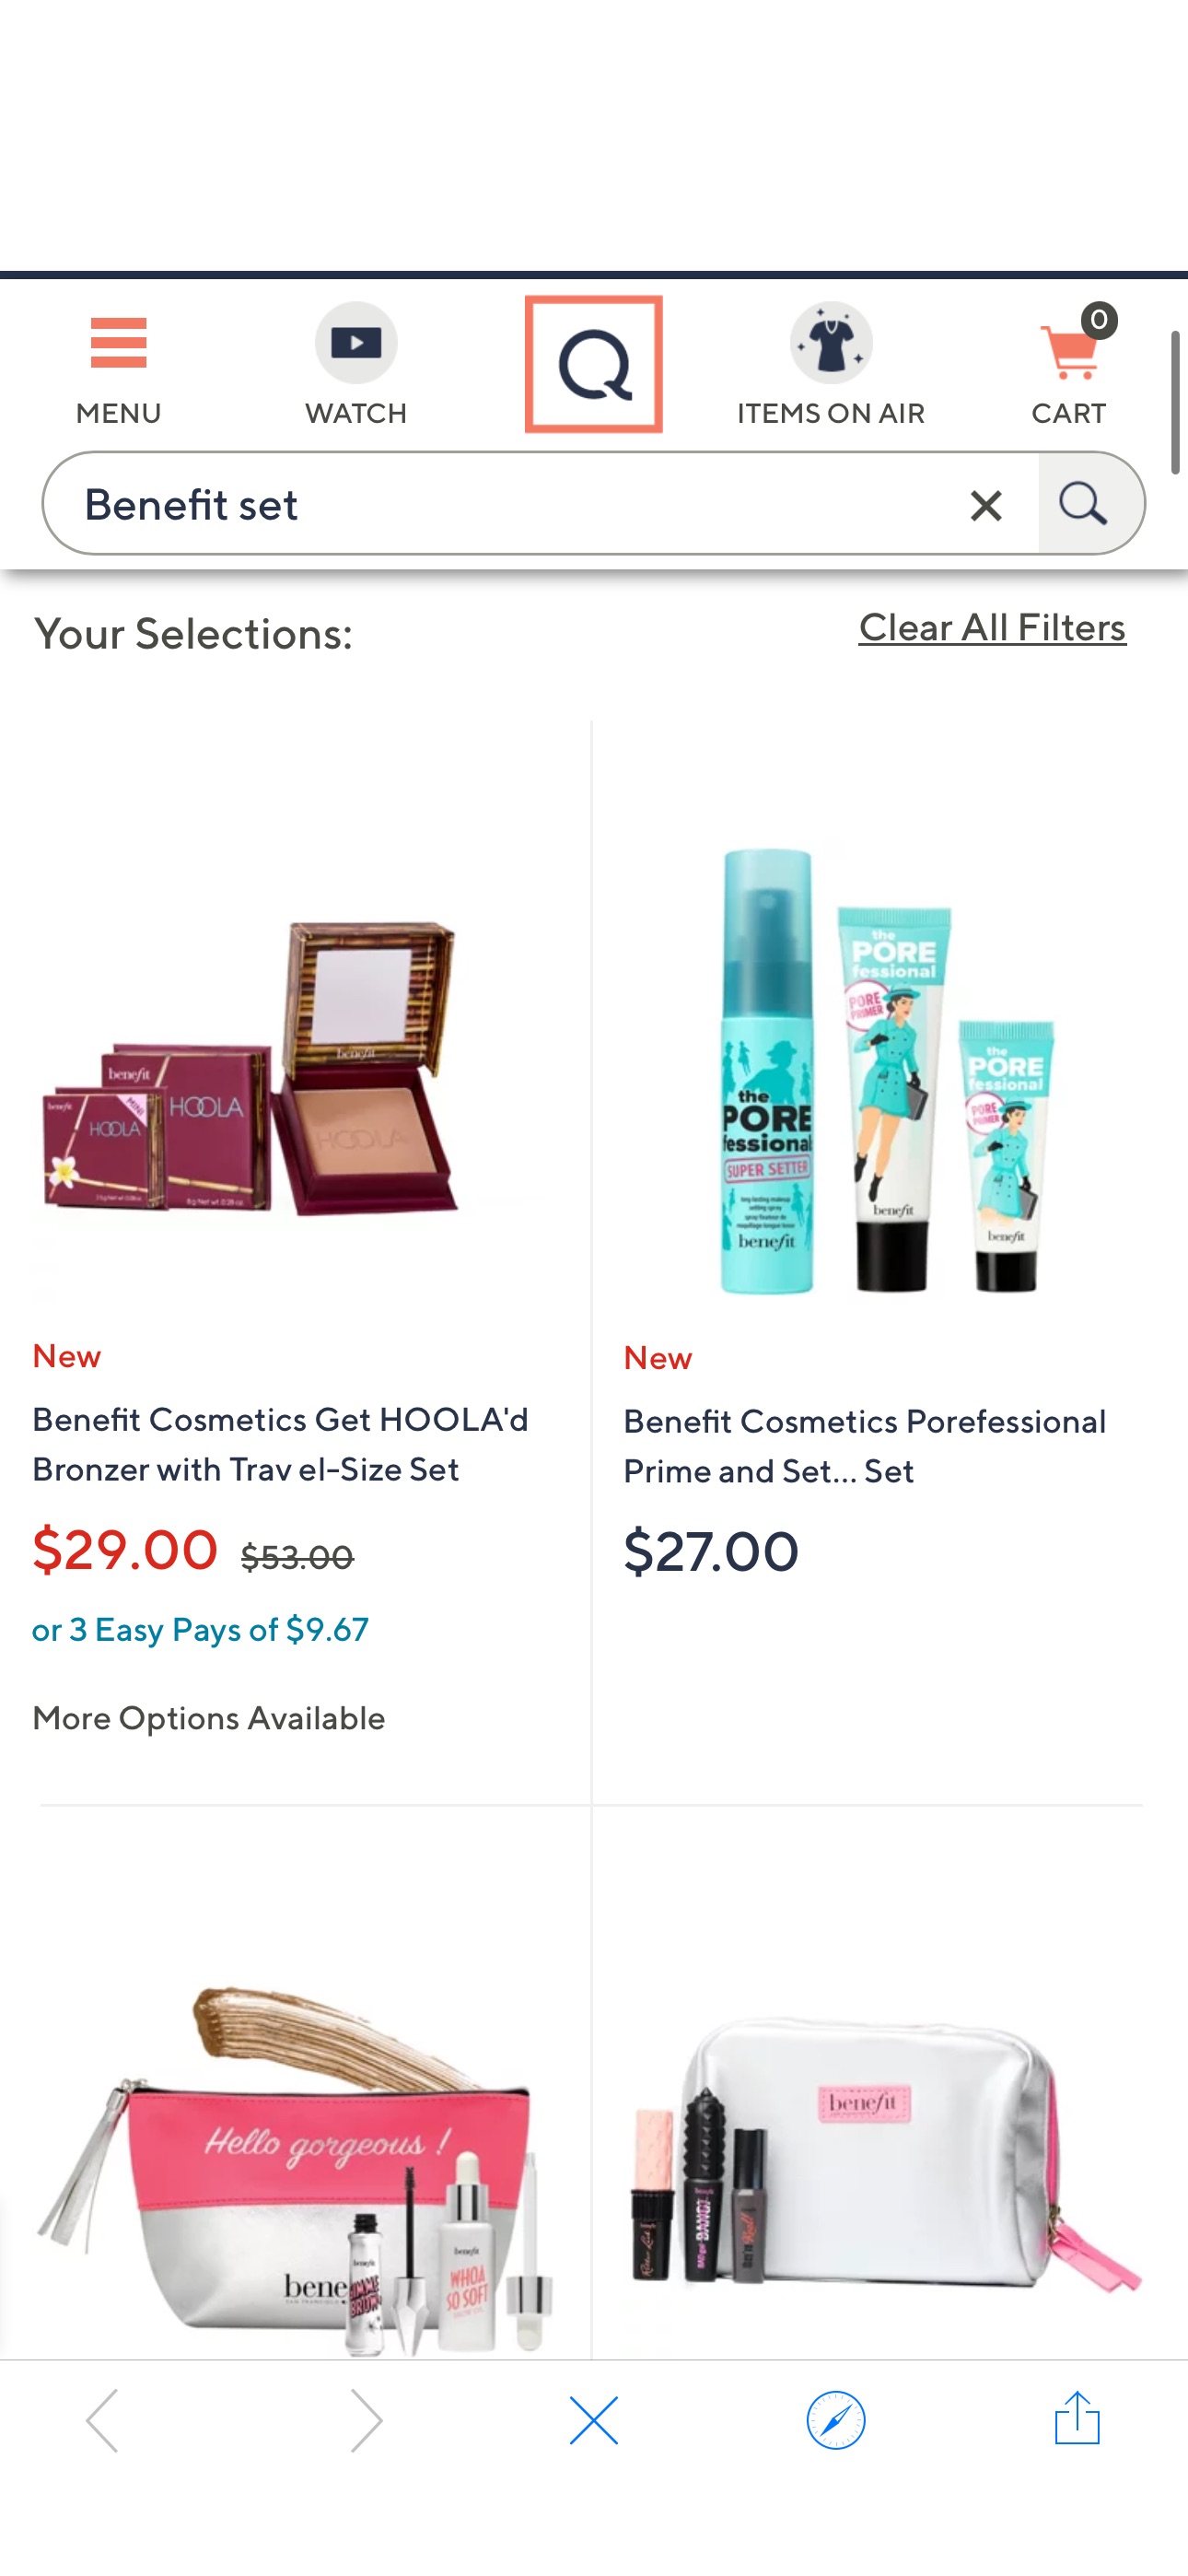 Benefit set Search Results - QVC.com Makeup Sets + $20 off $40 
Create new account 
Code WELCOME20